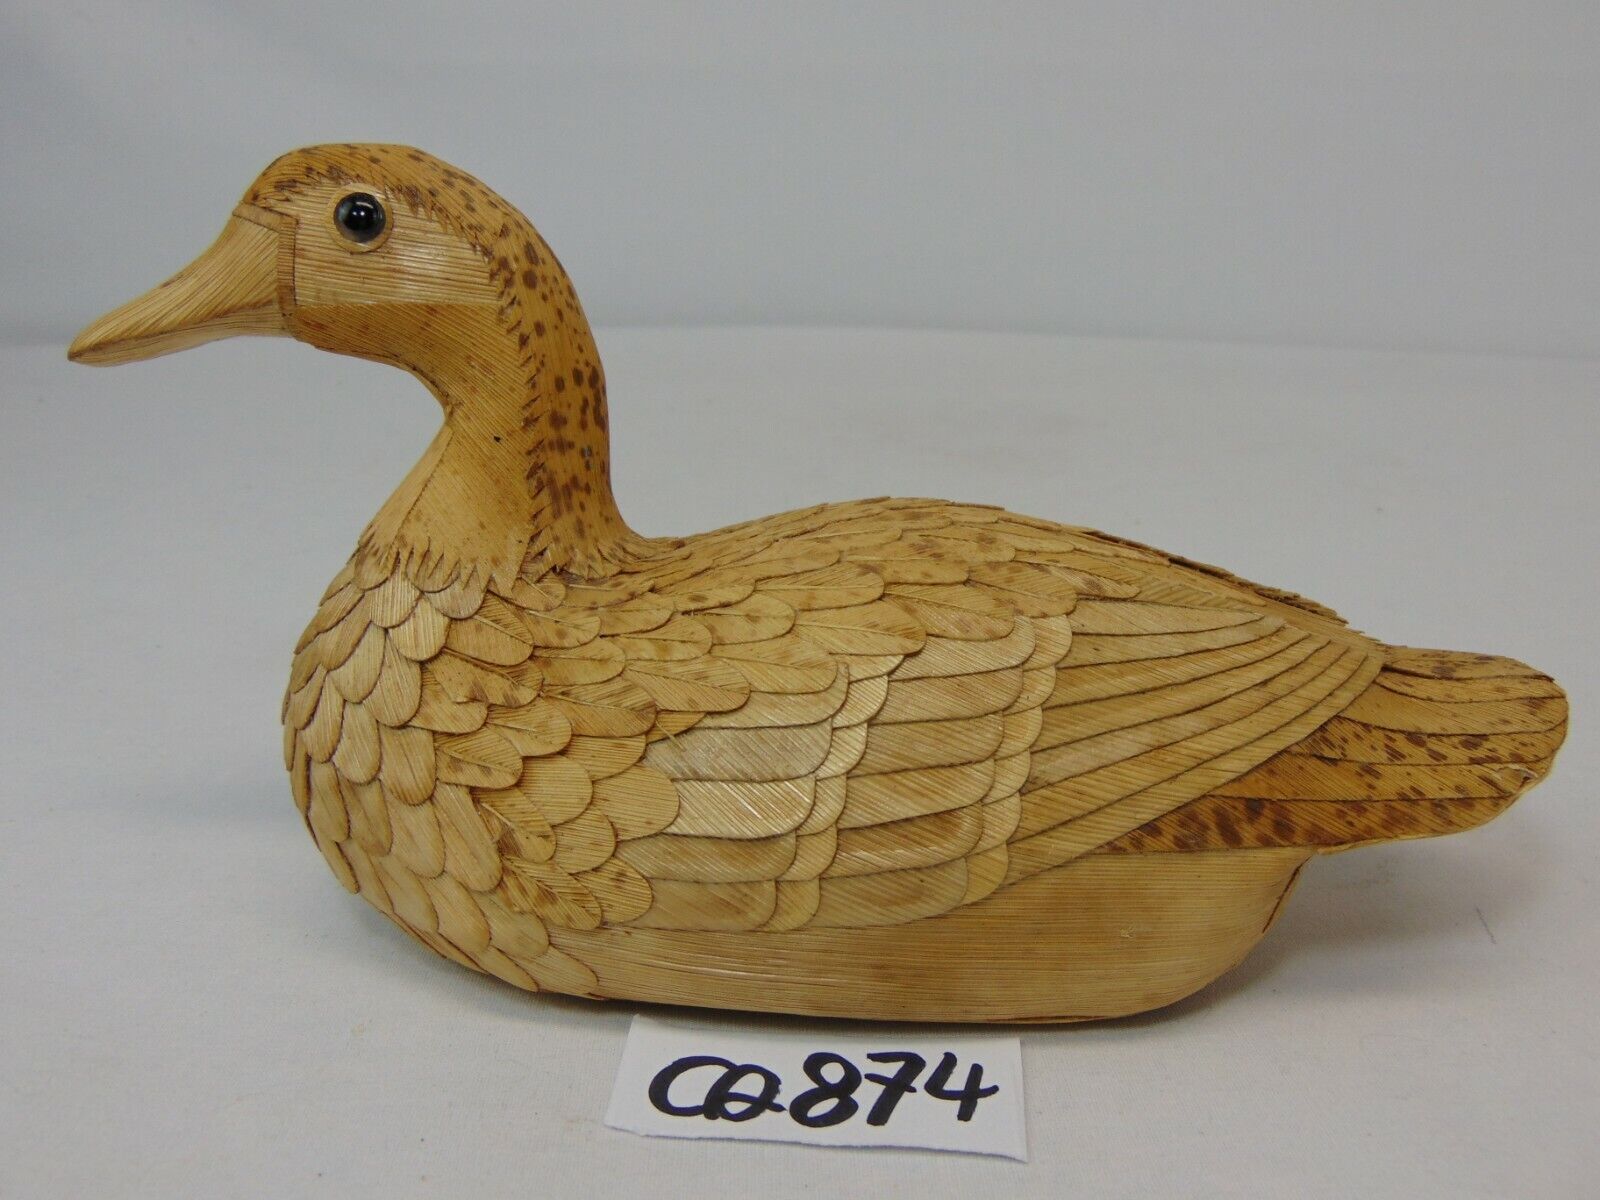 VINTAGE RARE PEOPLES REPUBLIC OF CHINA DUCK HAND MADE ART SHANGHAI HANDICRAFTS 